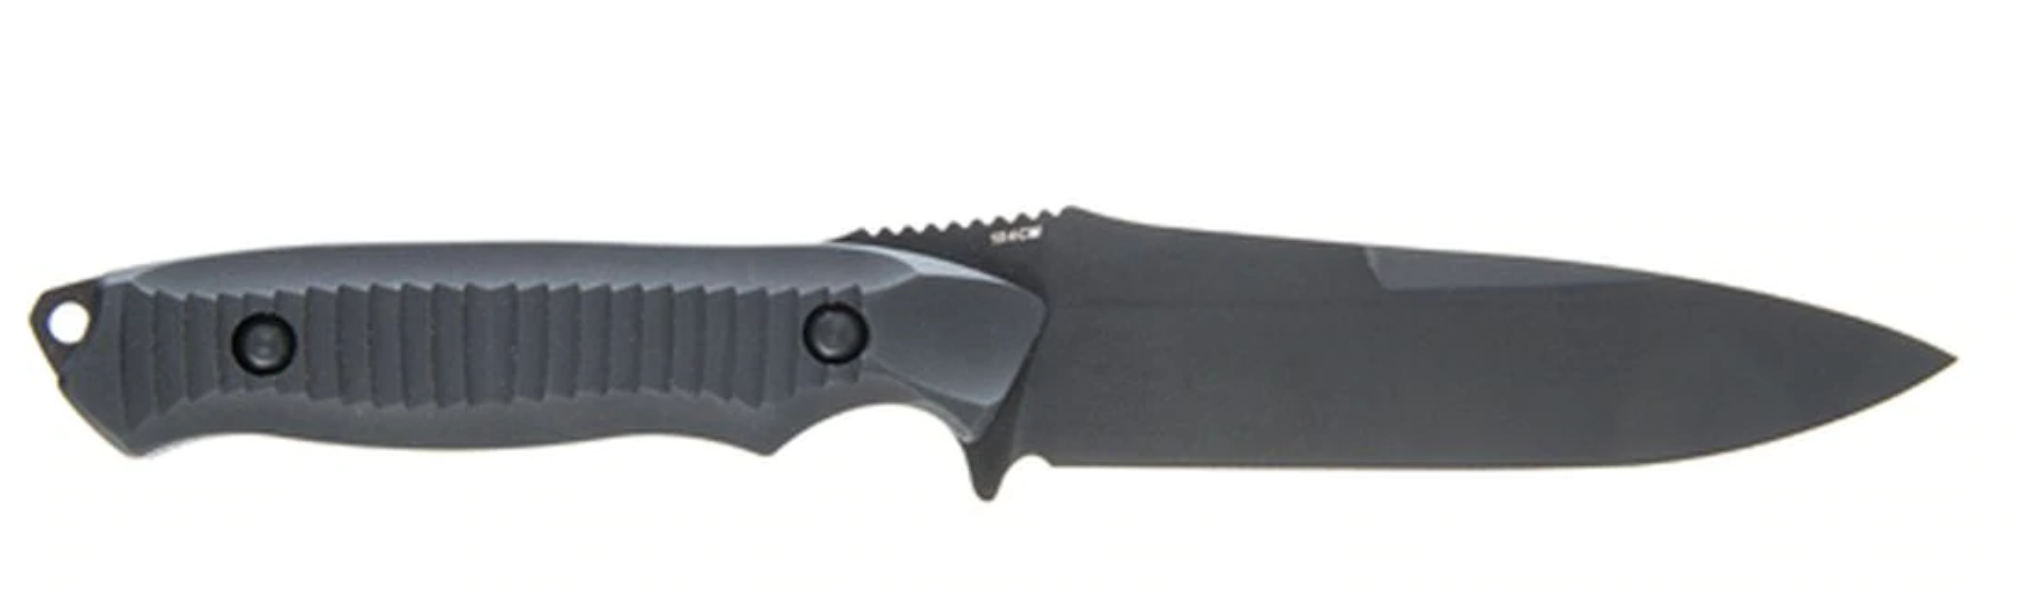 This drop-point-style knife is made of stainless steel.